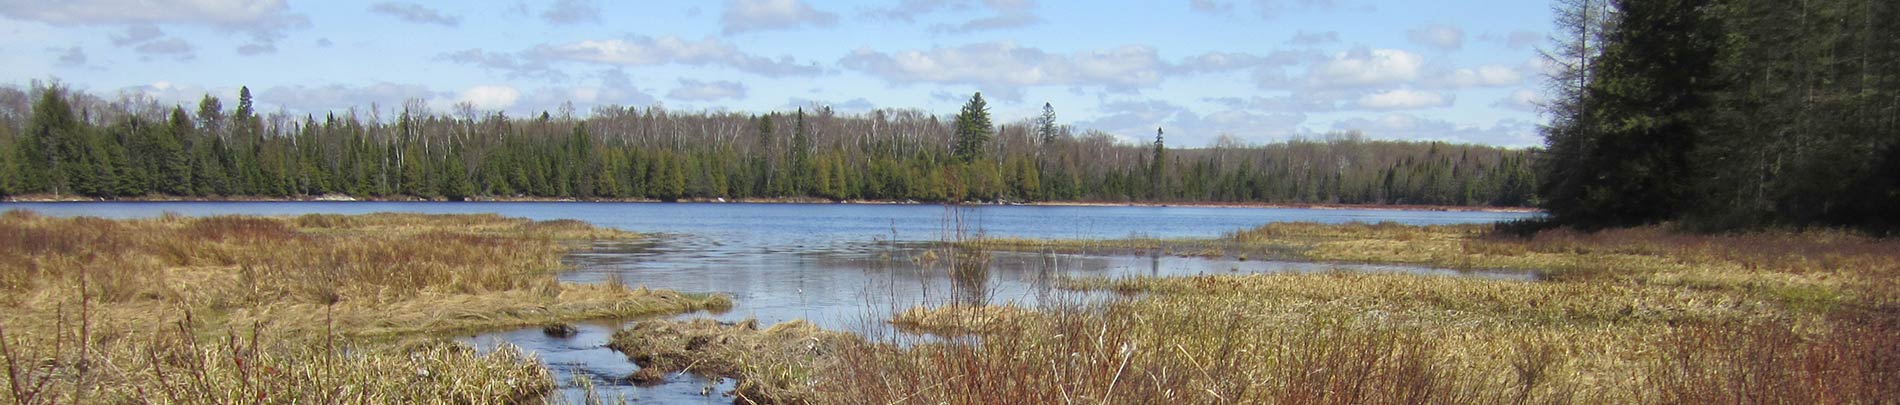 A view of Monck Lake from a reedy marsh along the portage.